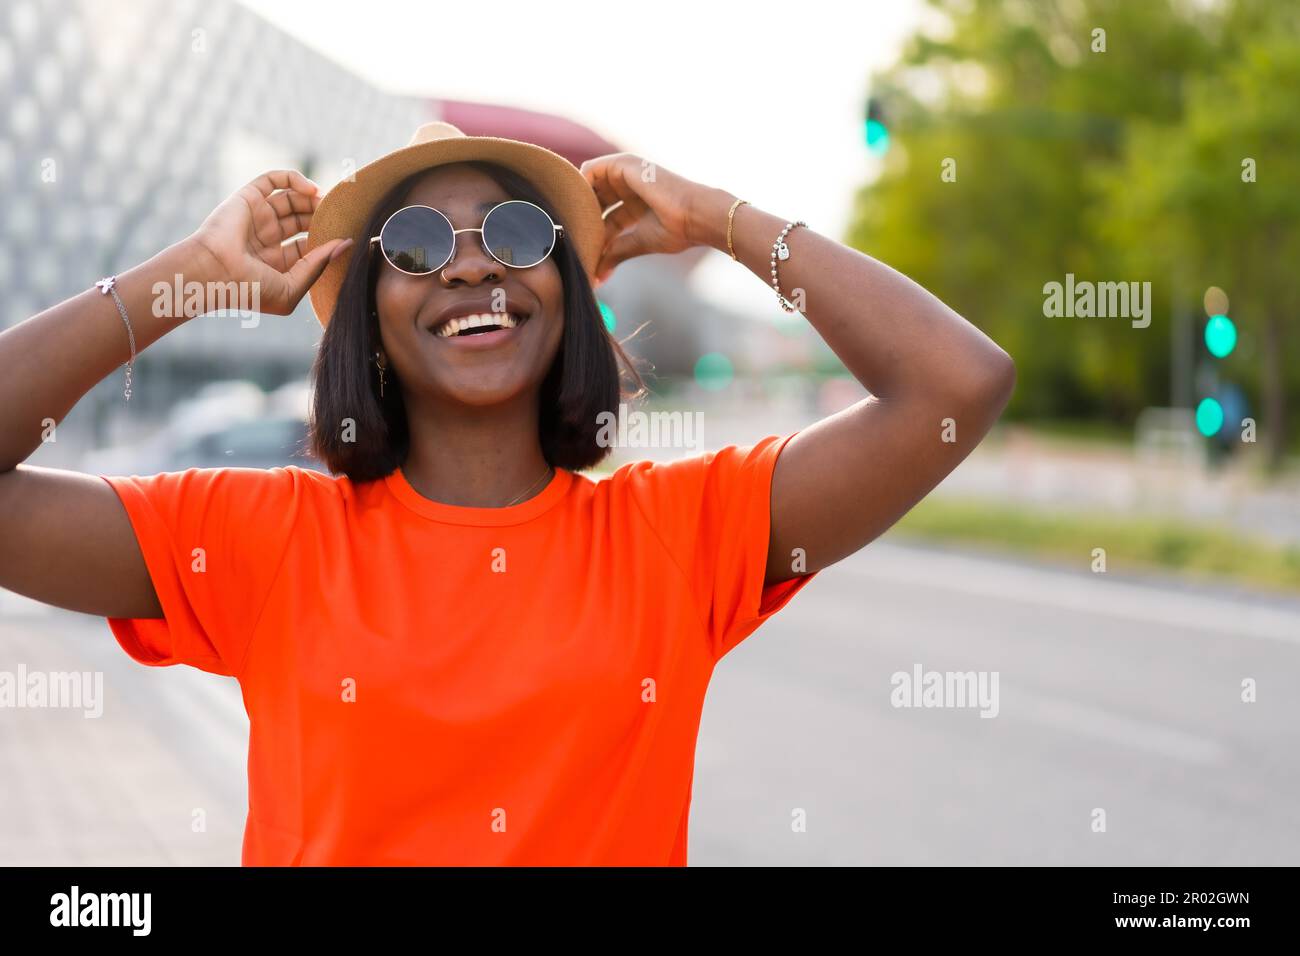 Young black woman tourist with orange t-shirt and sunglasses enjoying summer in the city, lifestyle photos Stock Photo